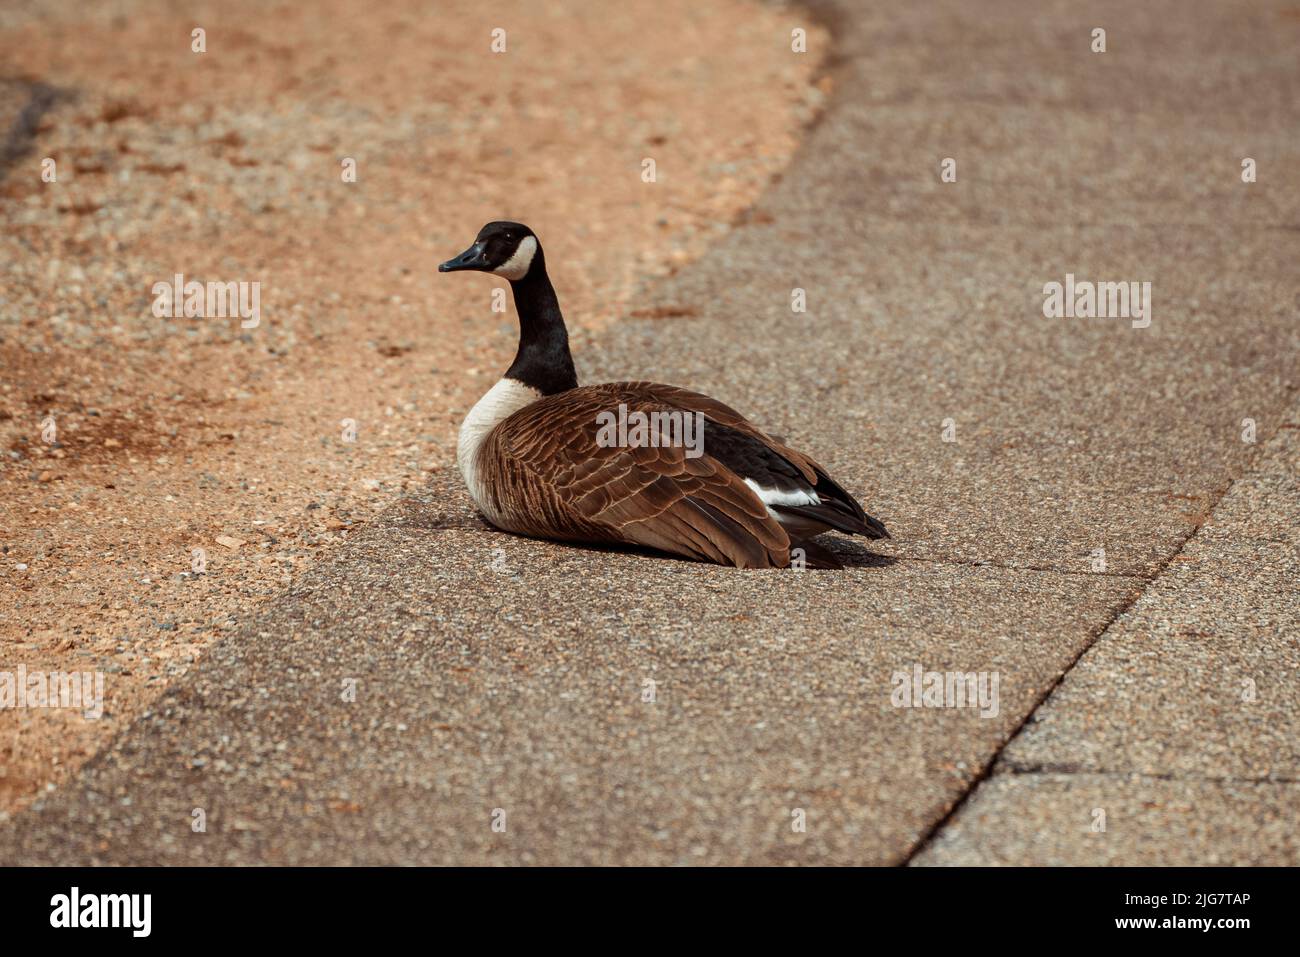 A closeup of a Canada goose (Branta canadensis) resting on the ground Stock Photo